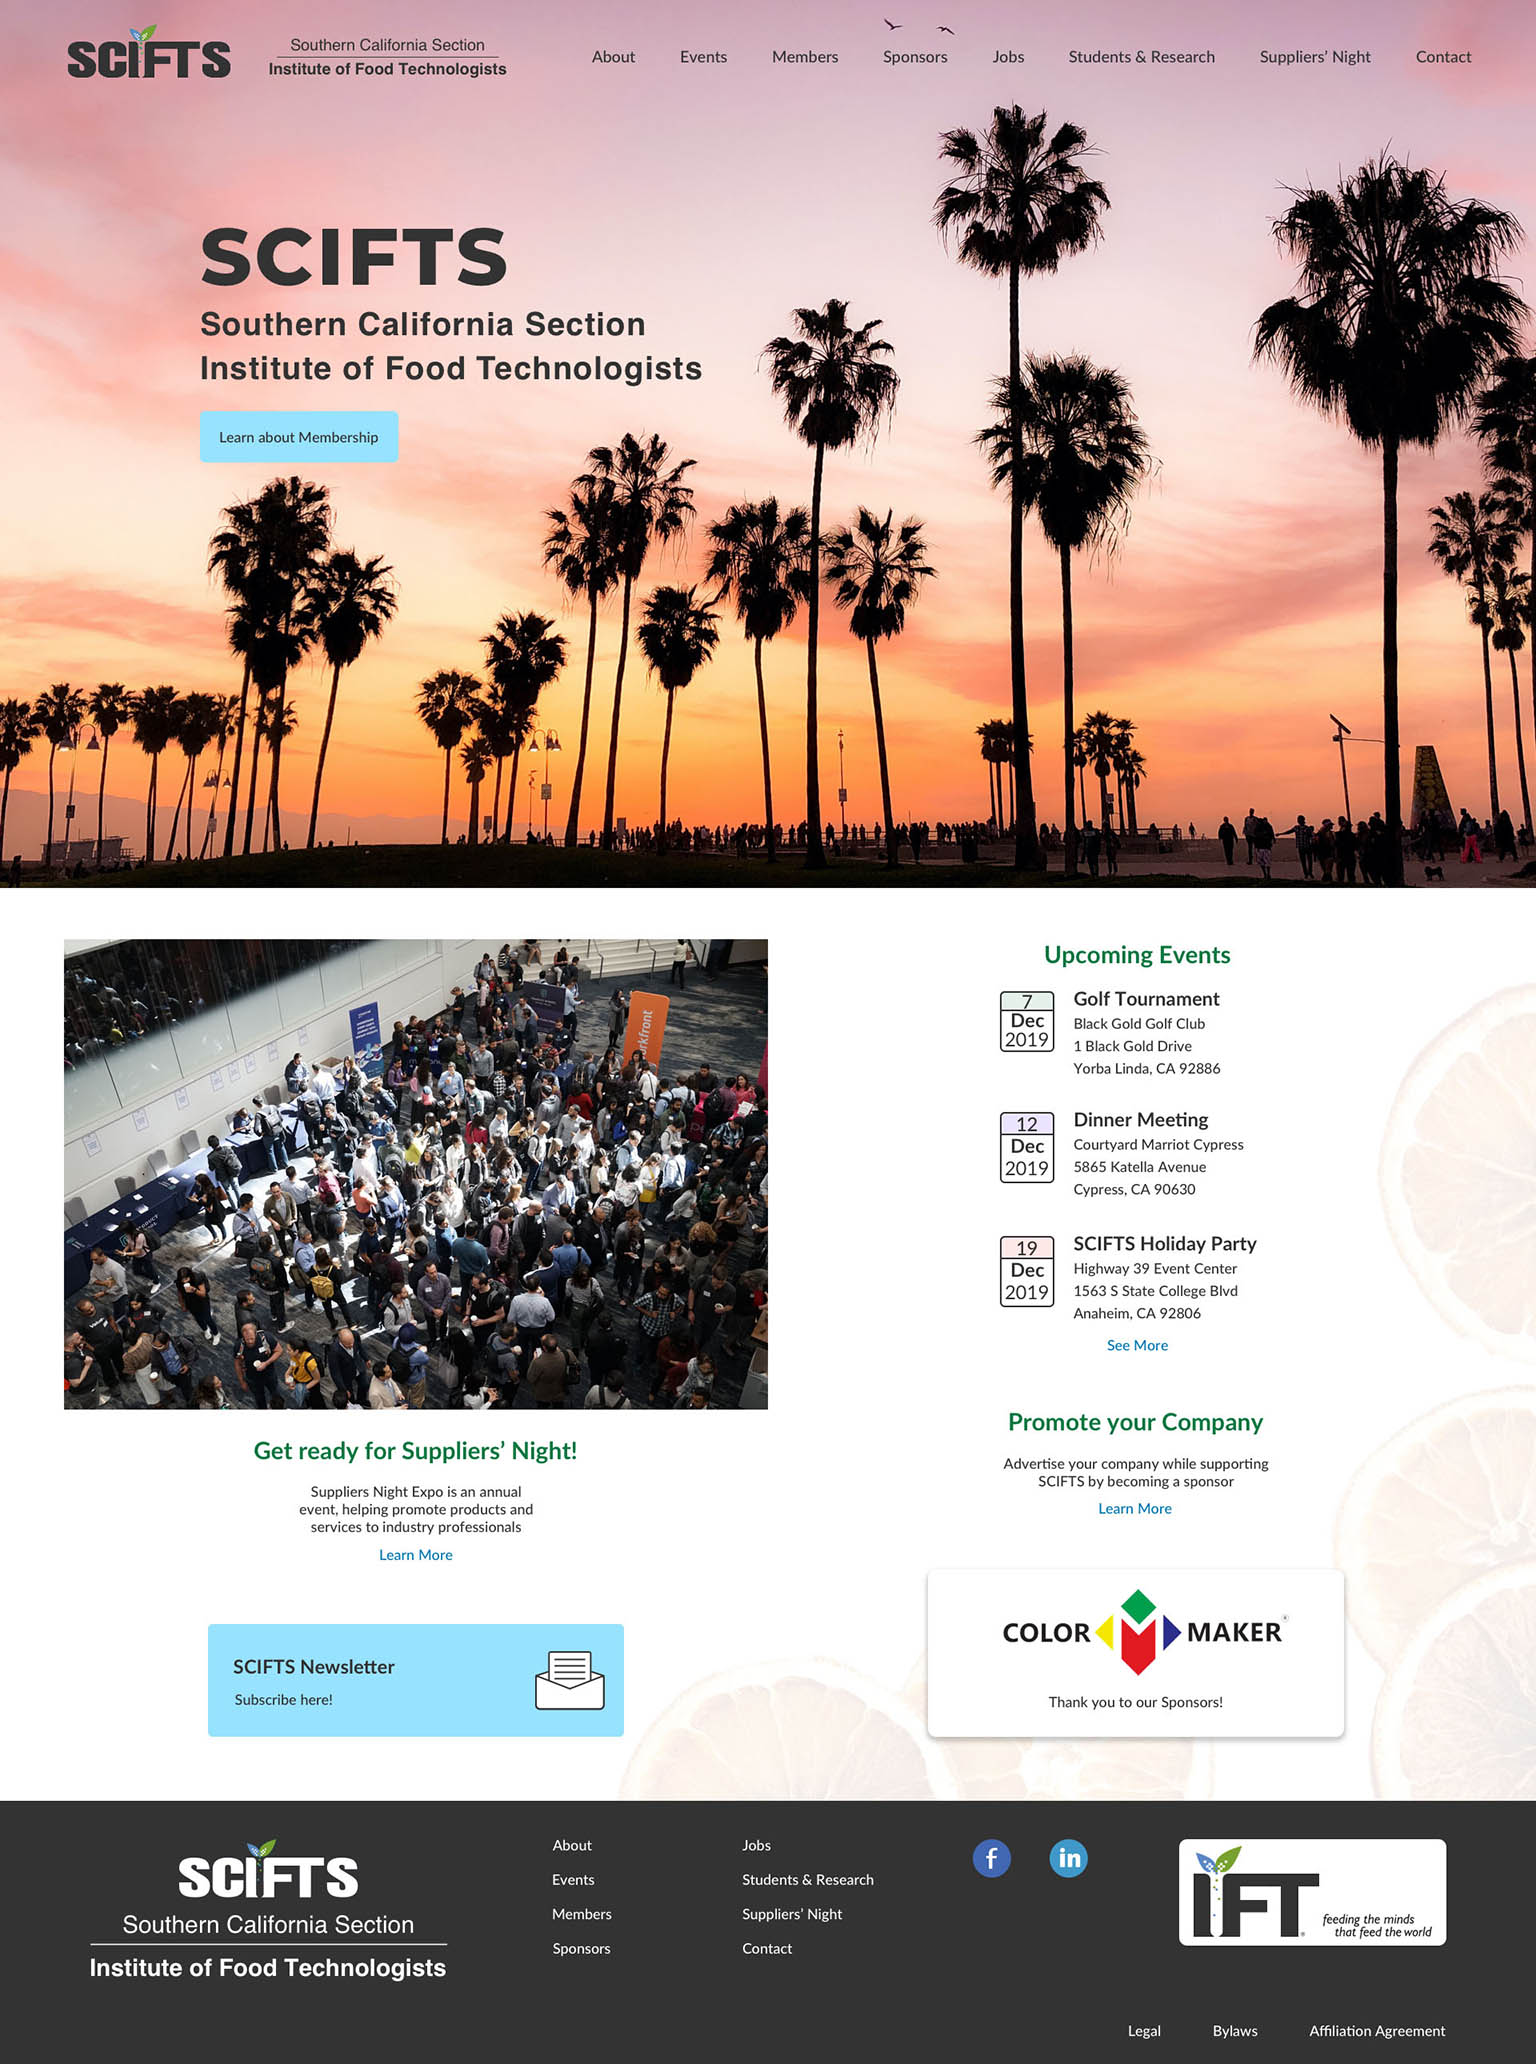 SCIFTS Homepage Redesign